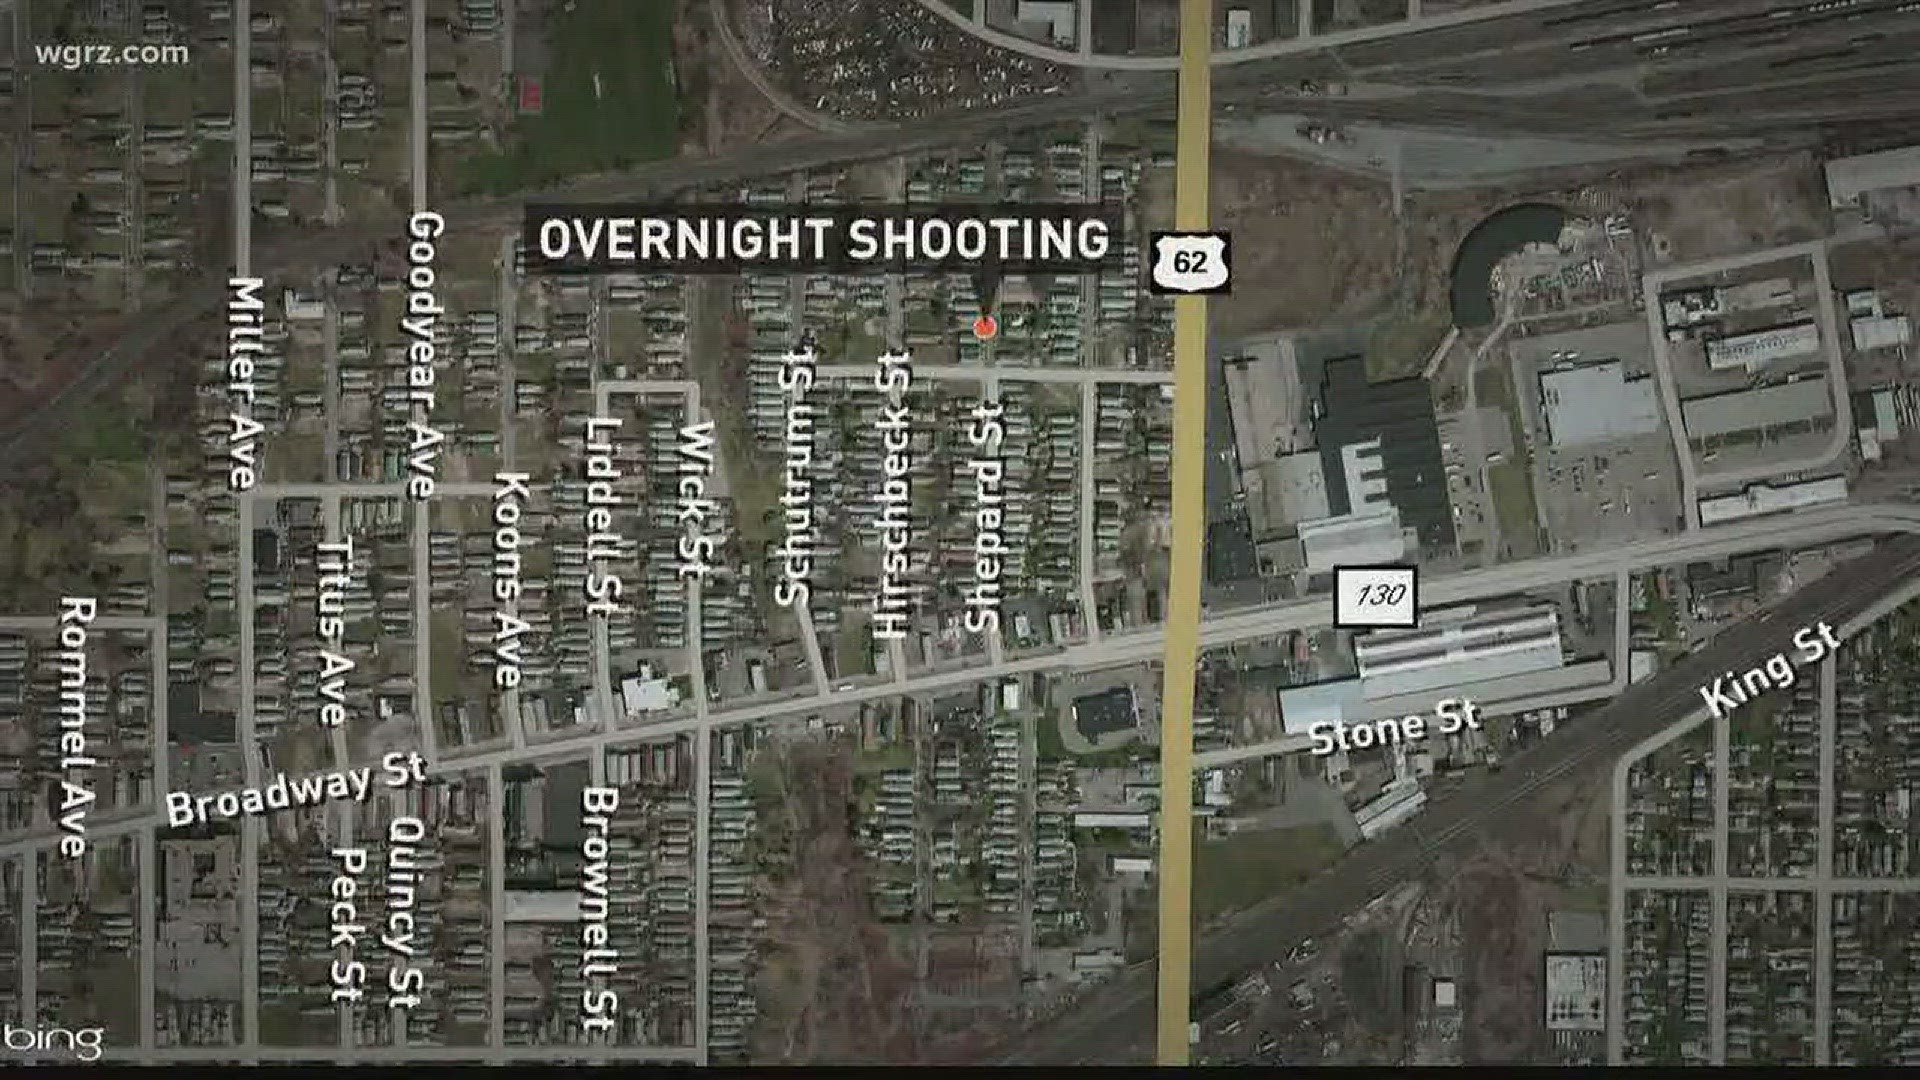 Young man in serious condition following shooting in Buffalo